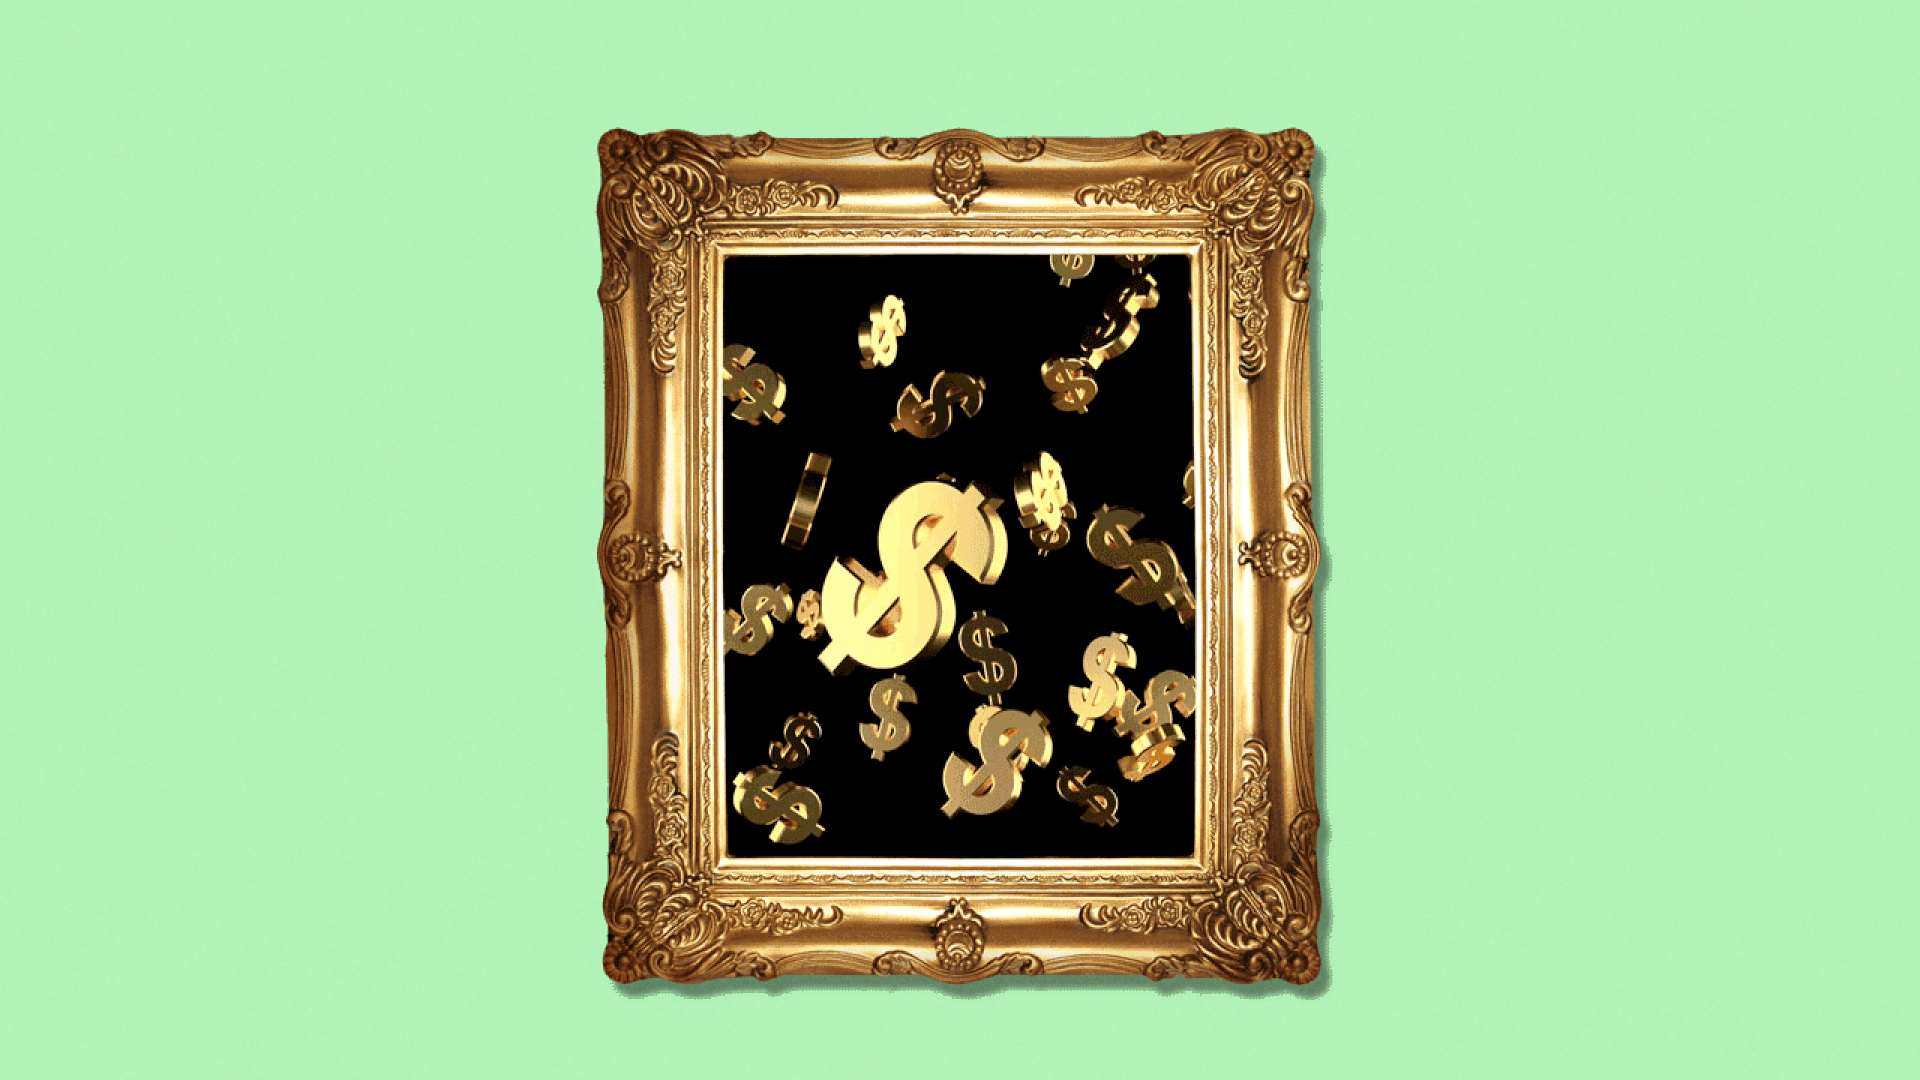 Animated illustration of an ornate frame with falling dollar signs.